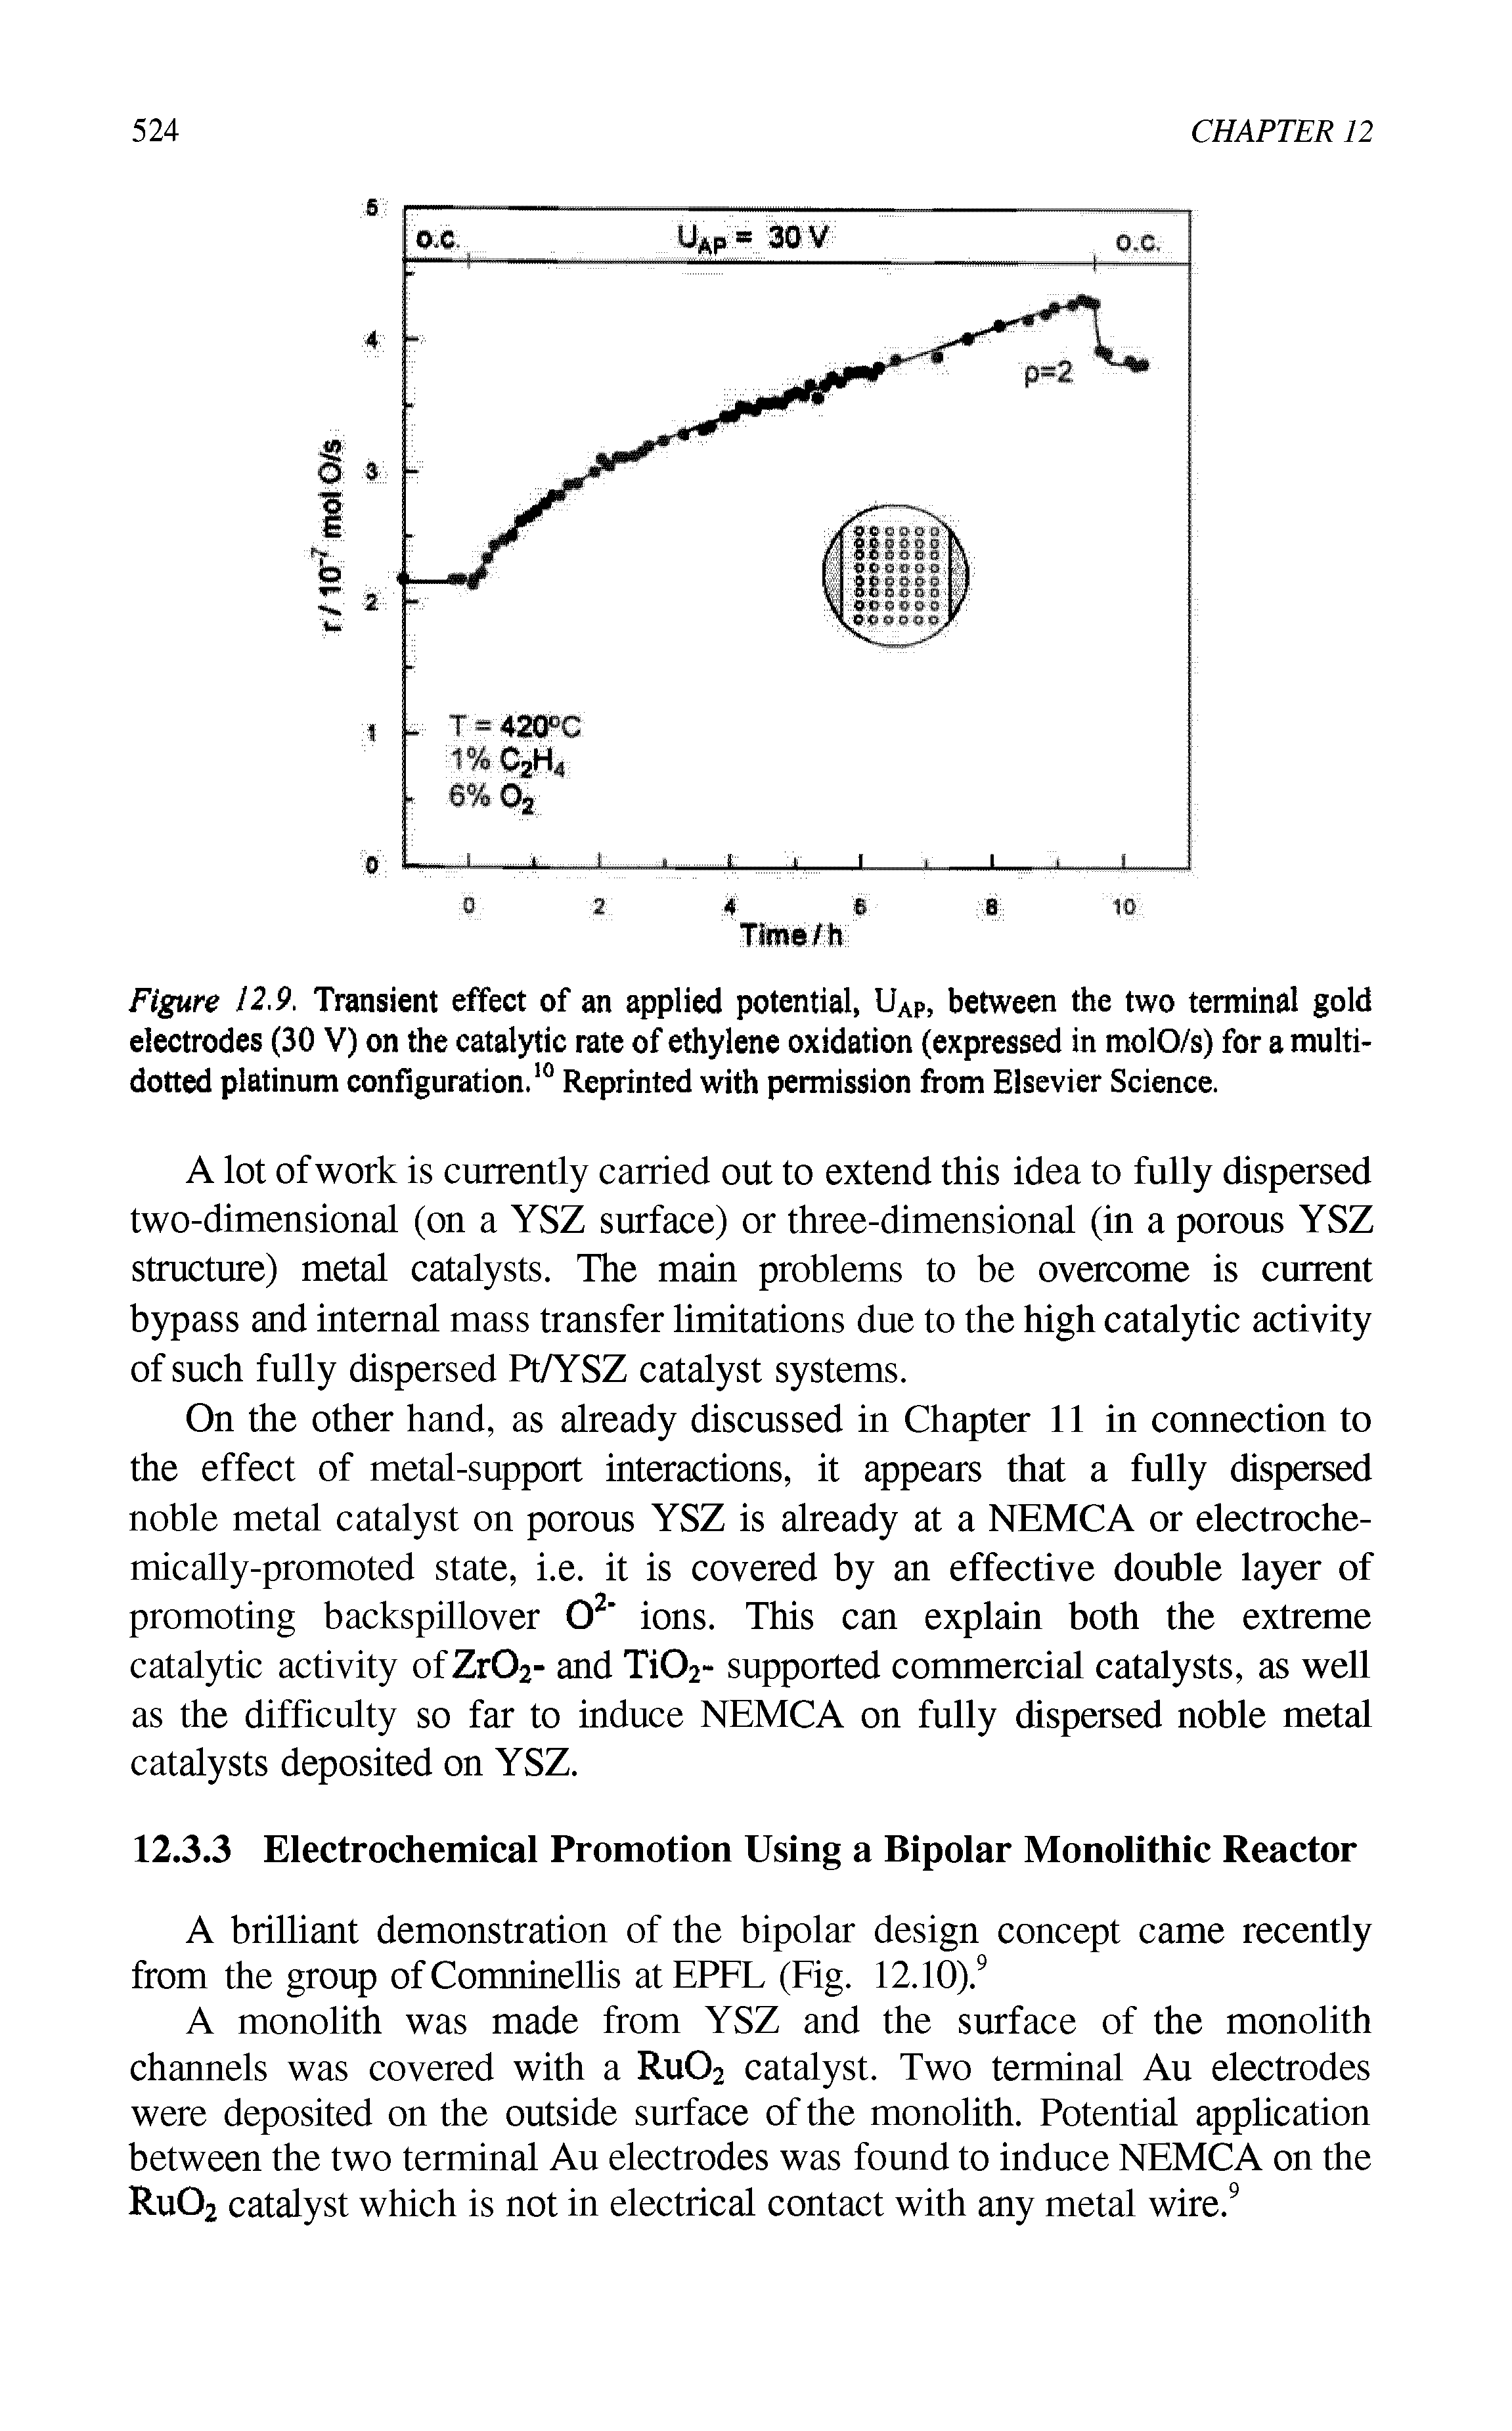 Figure 12,9, Transient effect of an applied potential, UAP, between the two terminal gold electrodes (30 V) on the catalytic rate of ethylene oxidation (expressed in molO/s) for a multi-dotted platinum configuration.10 Reprinted with permission from Elsevier Science.